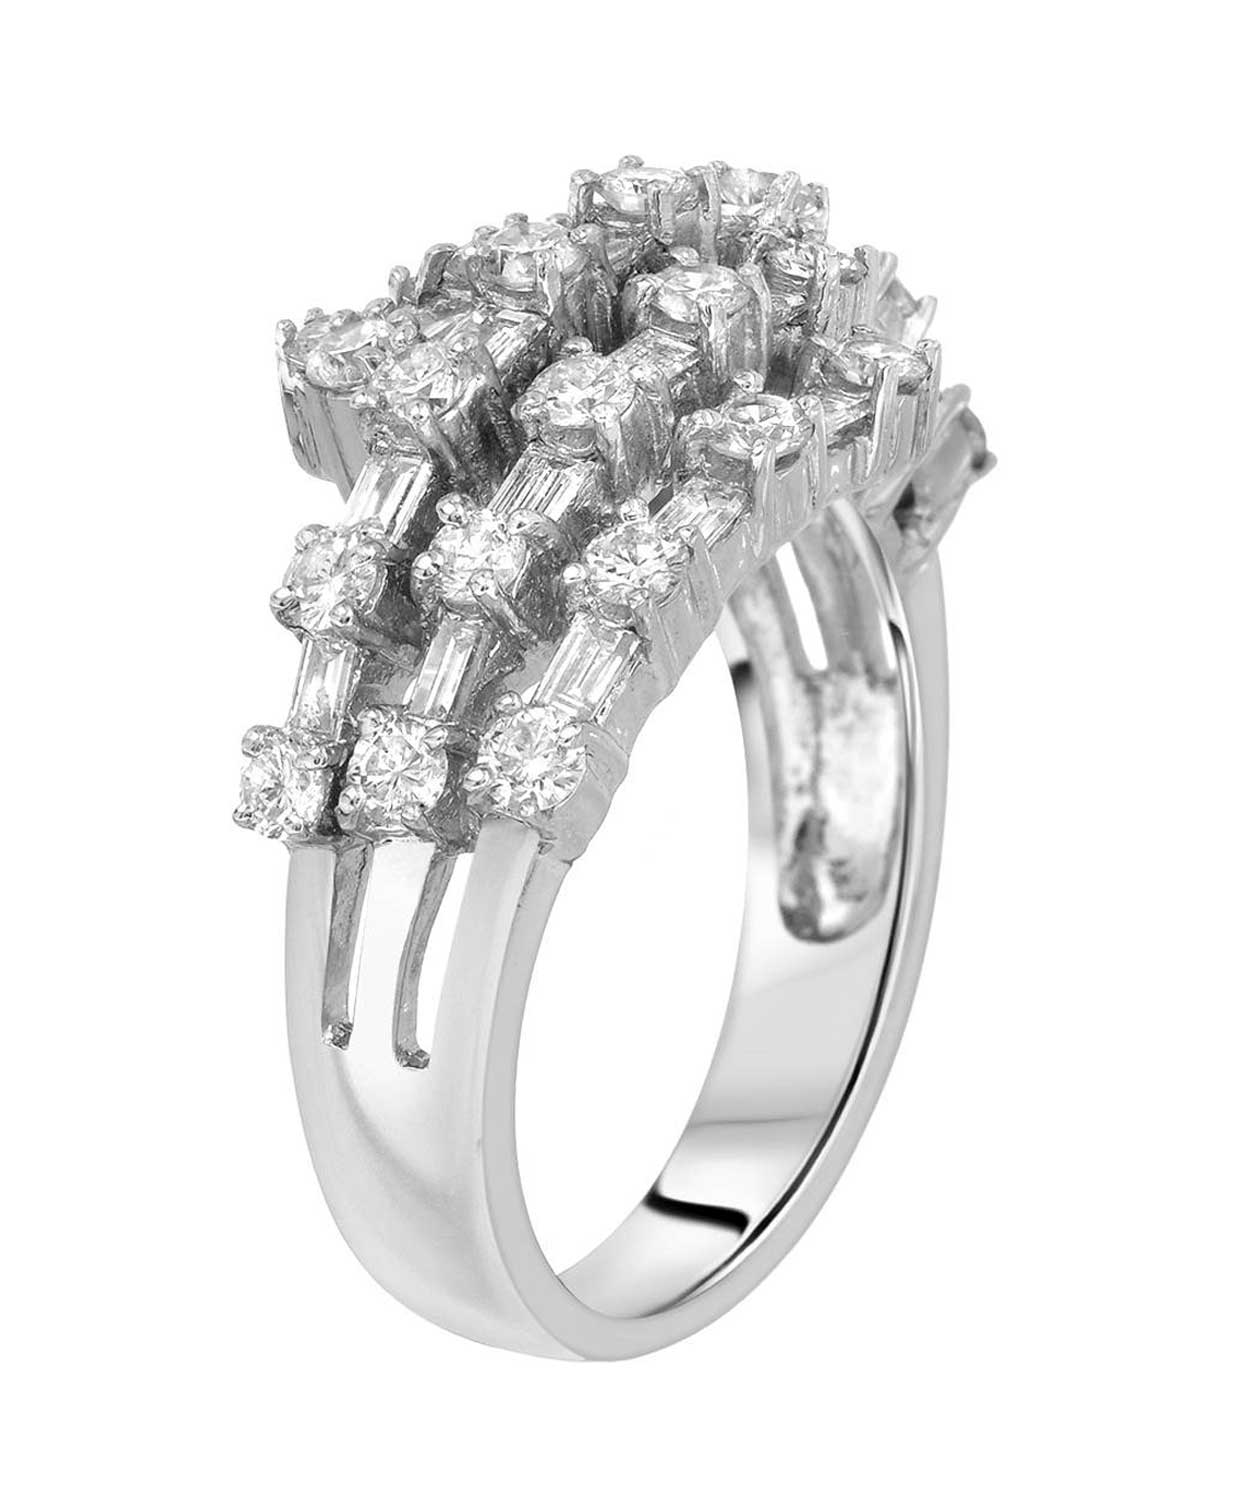 Signature Collection 1.50 ctw Diamond 18k White Gold Right Hand Ring View 2